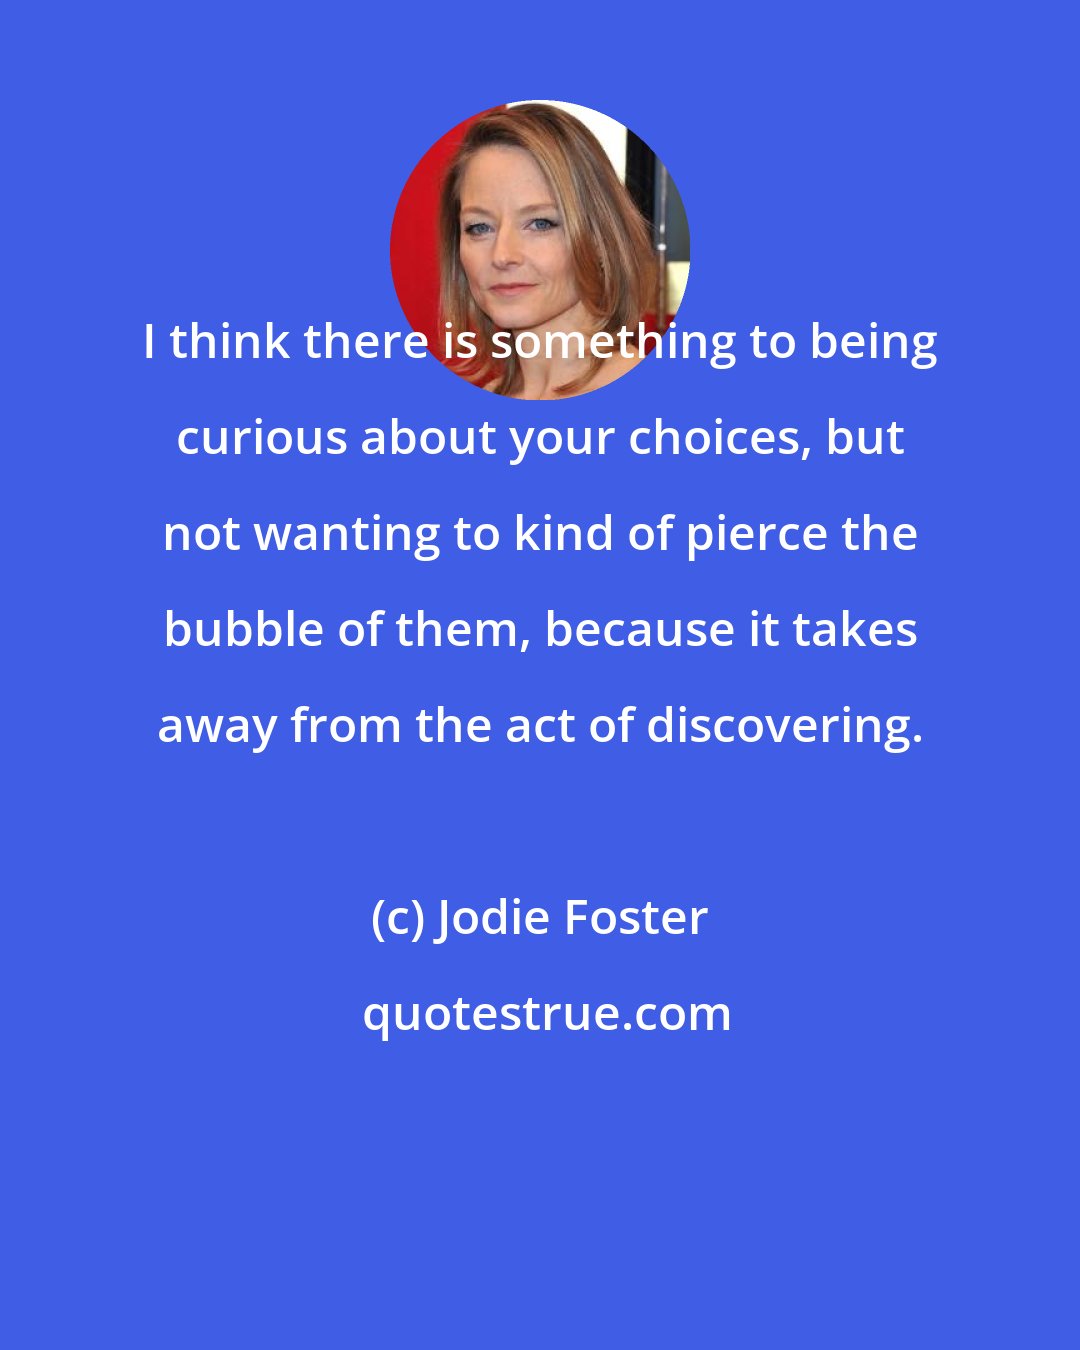 Jodie Foster: I think there is something to being curious about your choices, but not wanting to kind of pierce the bubble of them, because it takes away from the act of discovering.